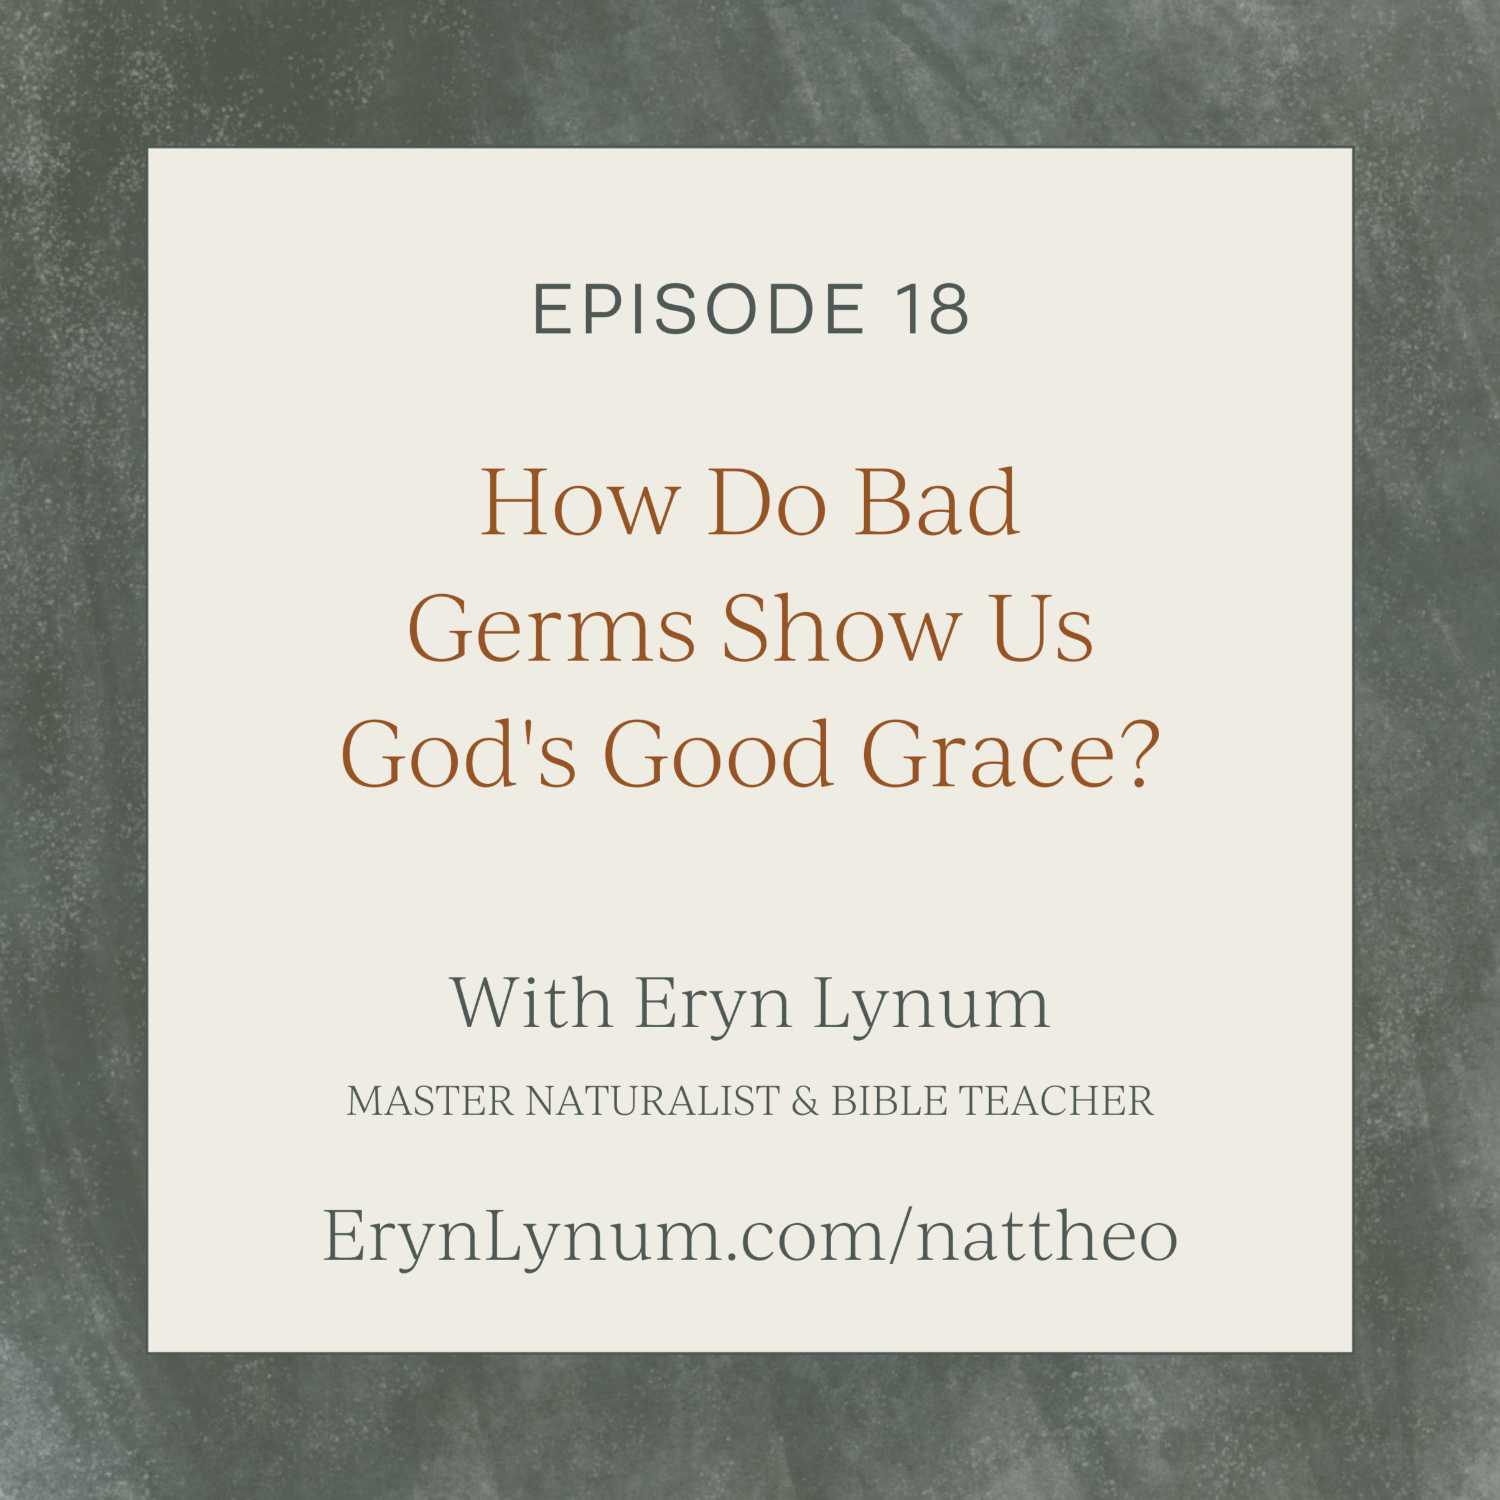 How Do Bad Germs Show Us God's Good Grace? Episode 18